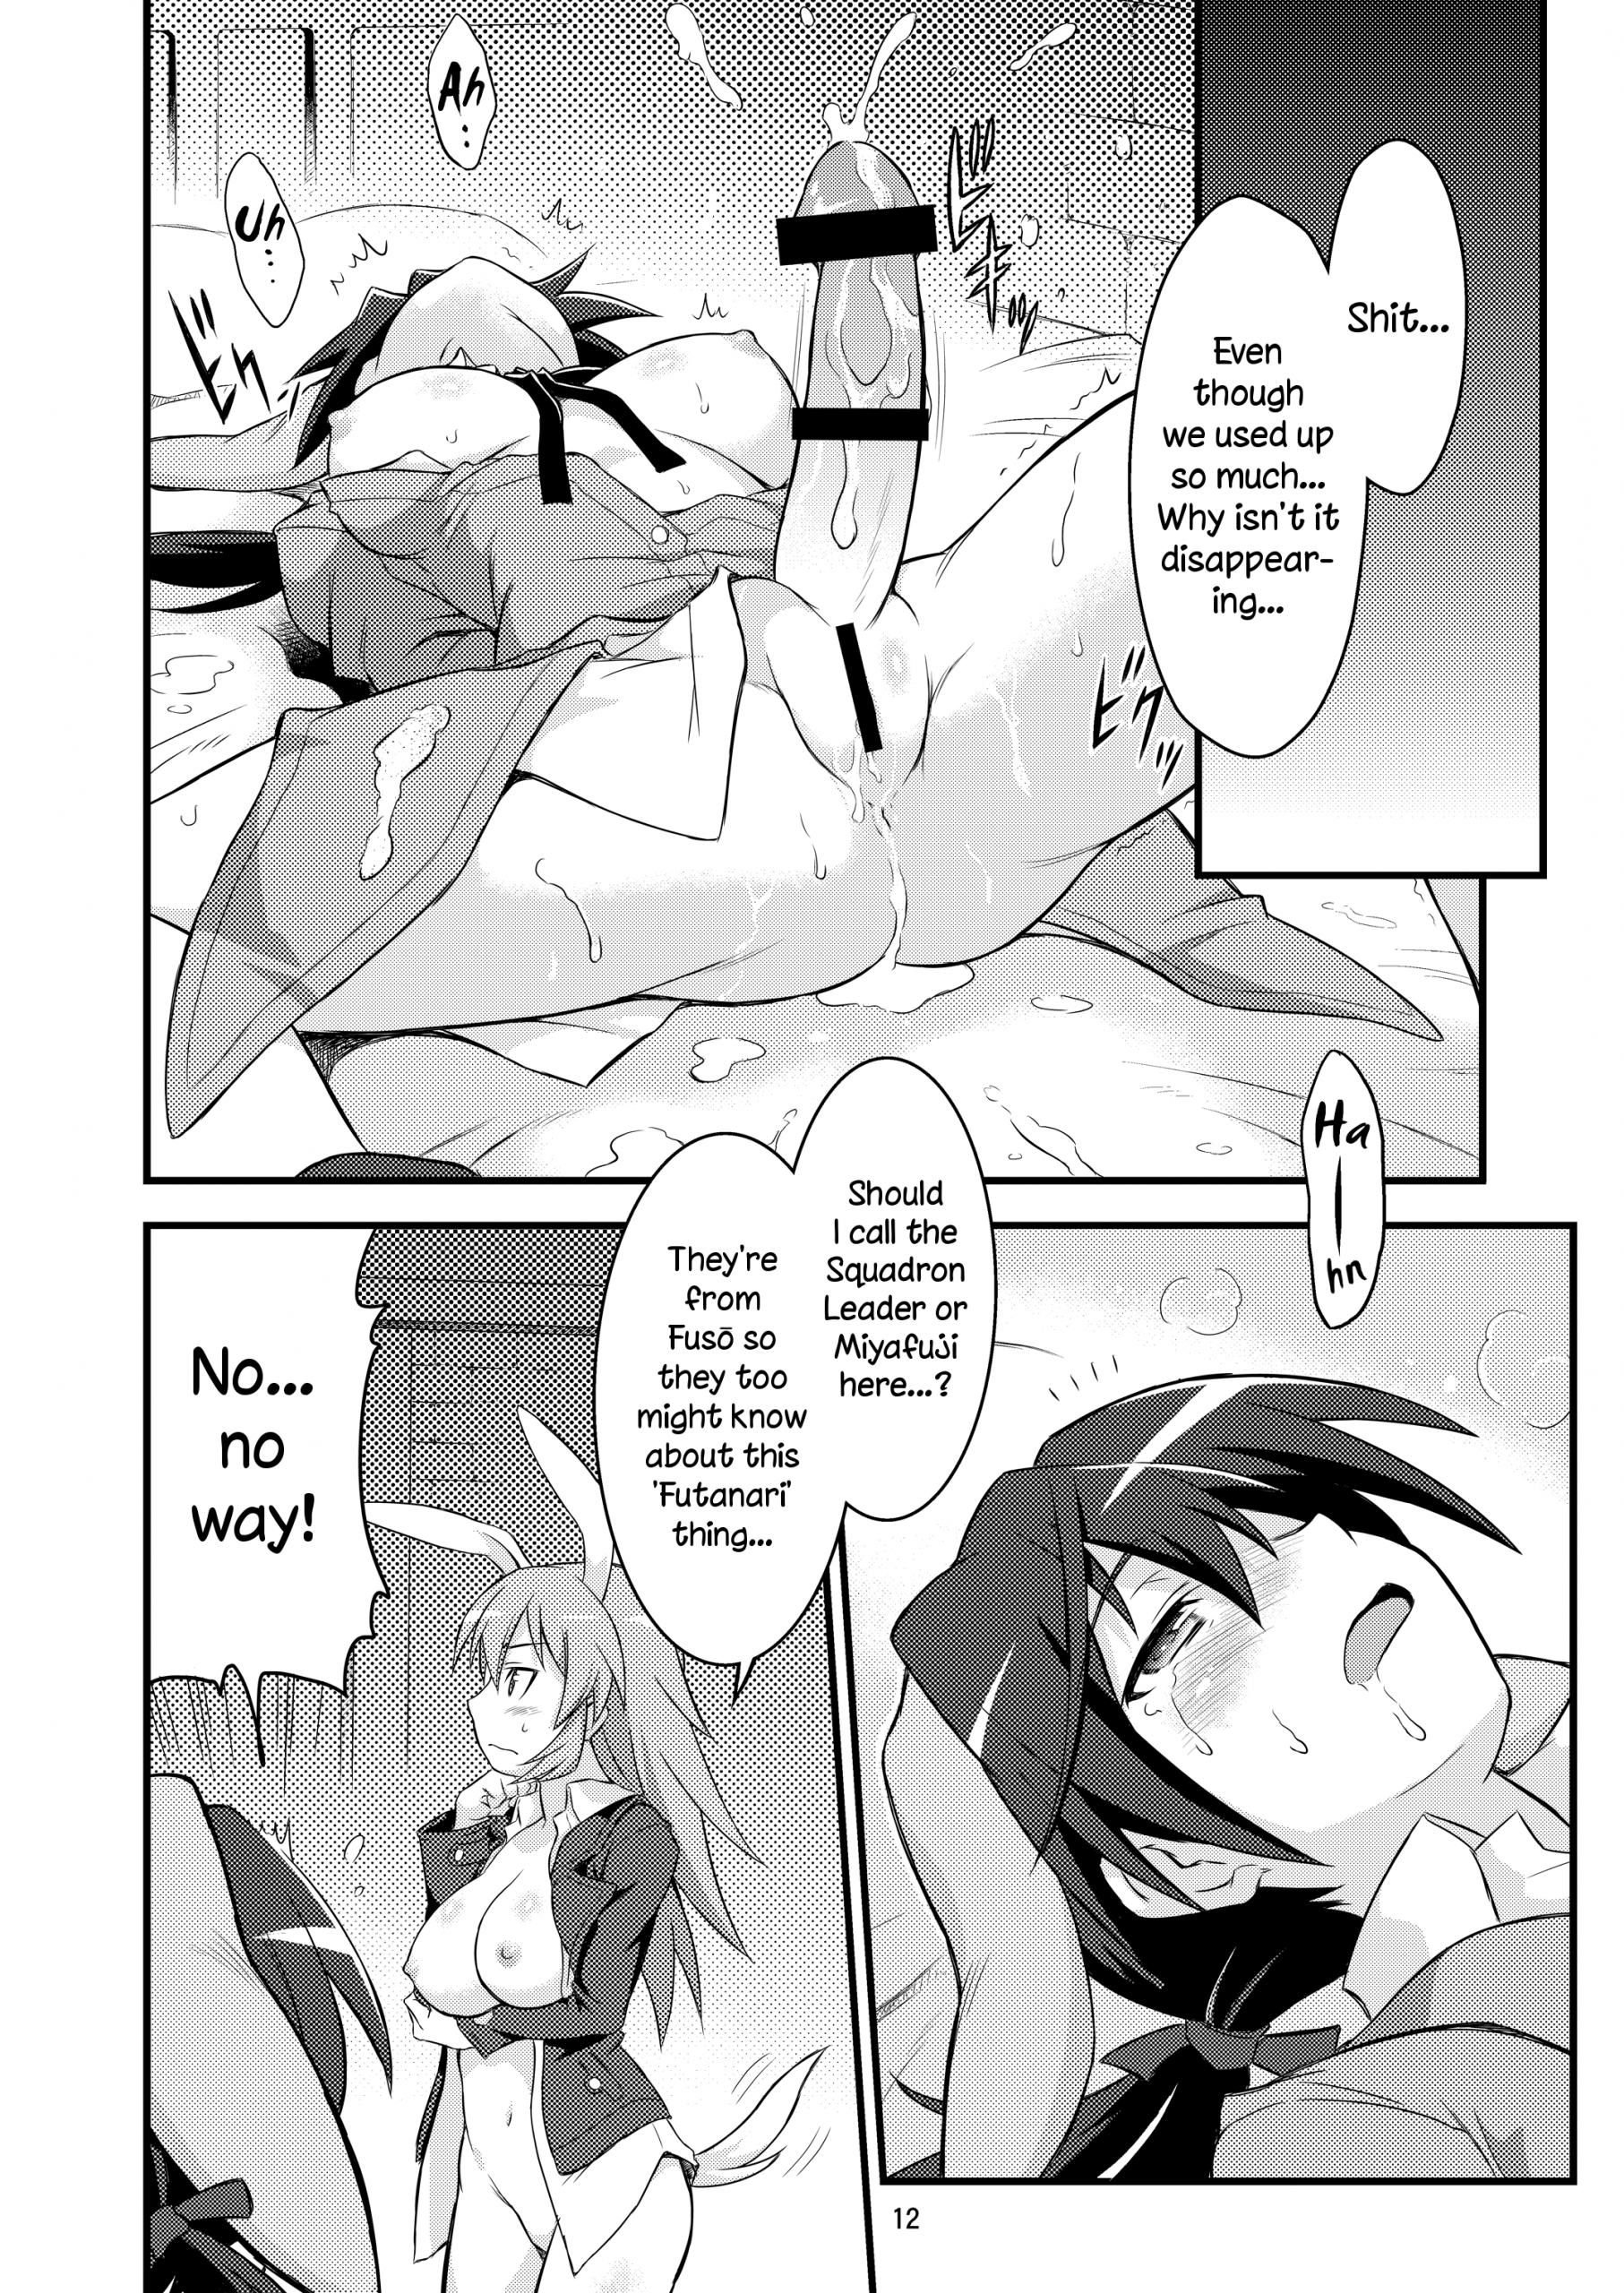 Shir and Gert in Big Trouble hentai manga picture 11